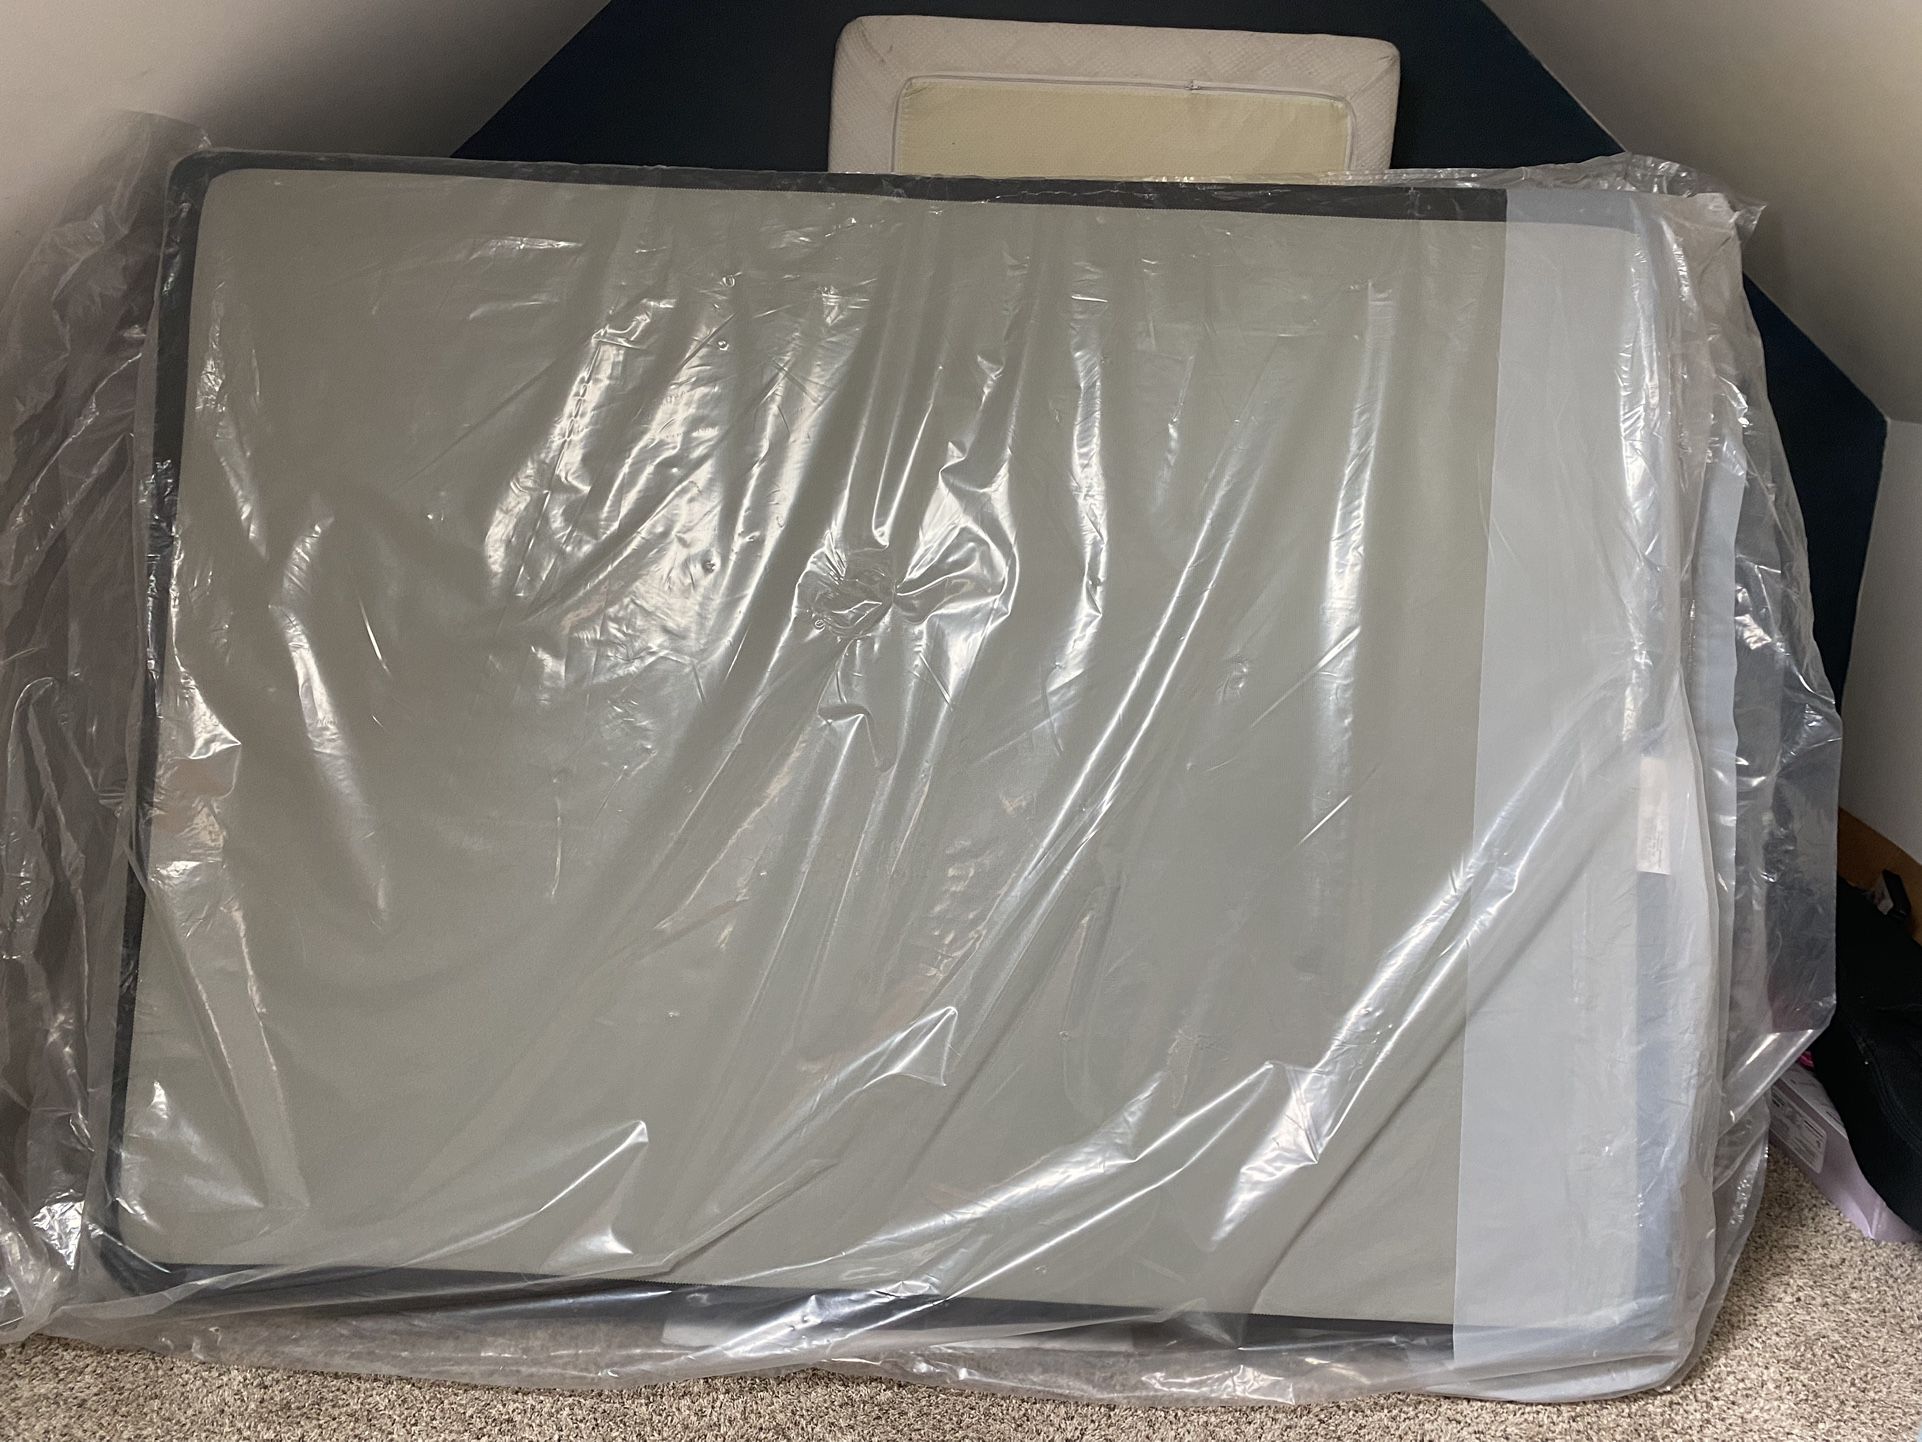 New, Never Used Box Spring Full Size Around 78.5 By 59